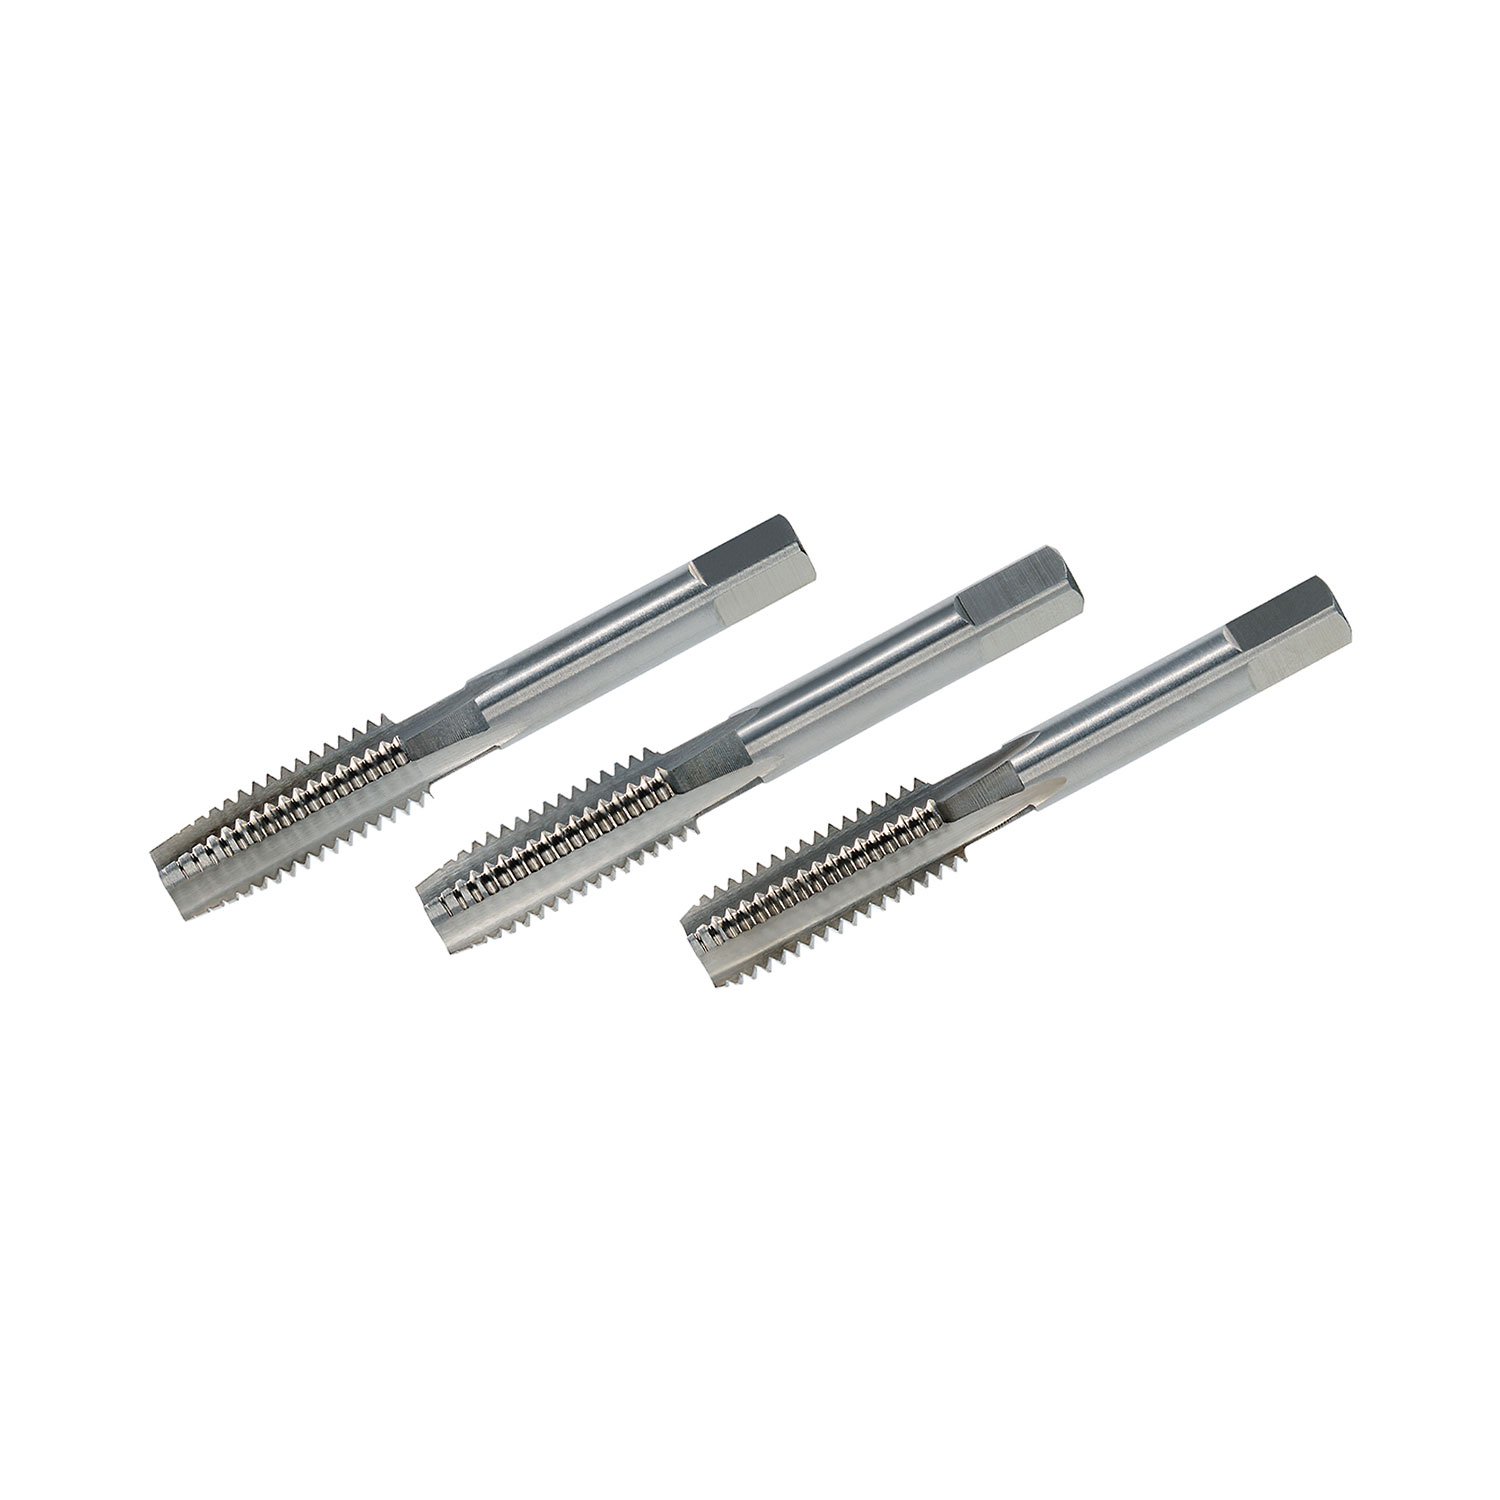 Hand Tap set of 3 pieces DIN 352 HSS-G non-serial form - M 10 x 1.5